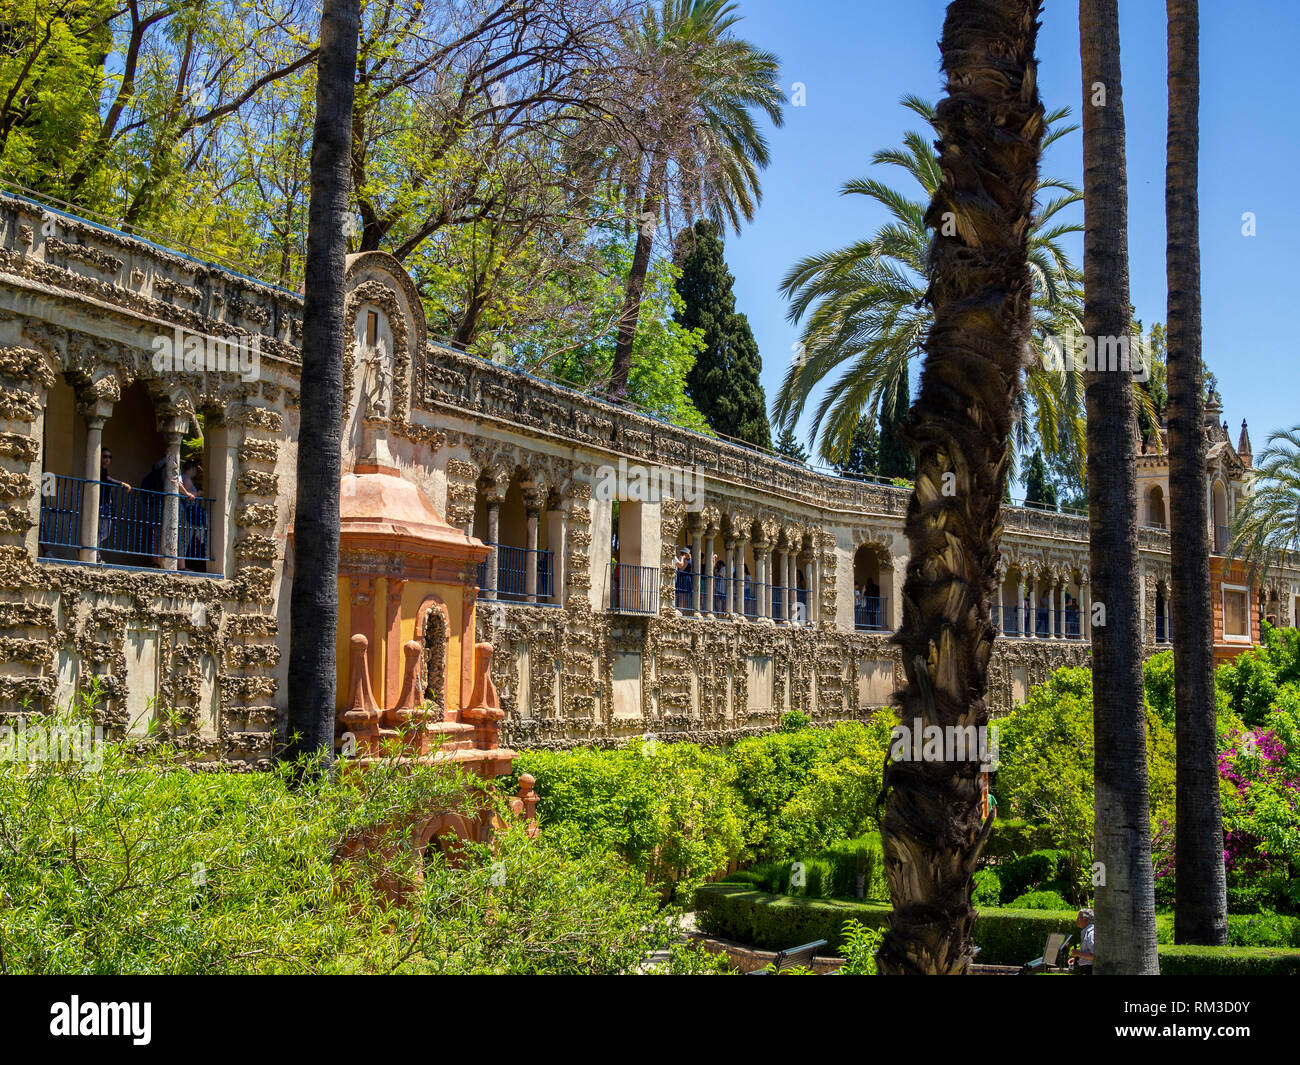 The Galería de Grutesco (Grotesque Gallery) in the gardens of the Alcazar of Seville, a royal palace built on the grounds of a Abbadid Muslim fortress Stock Photo